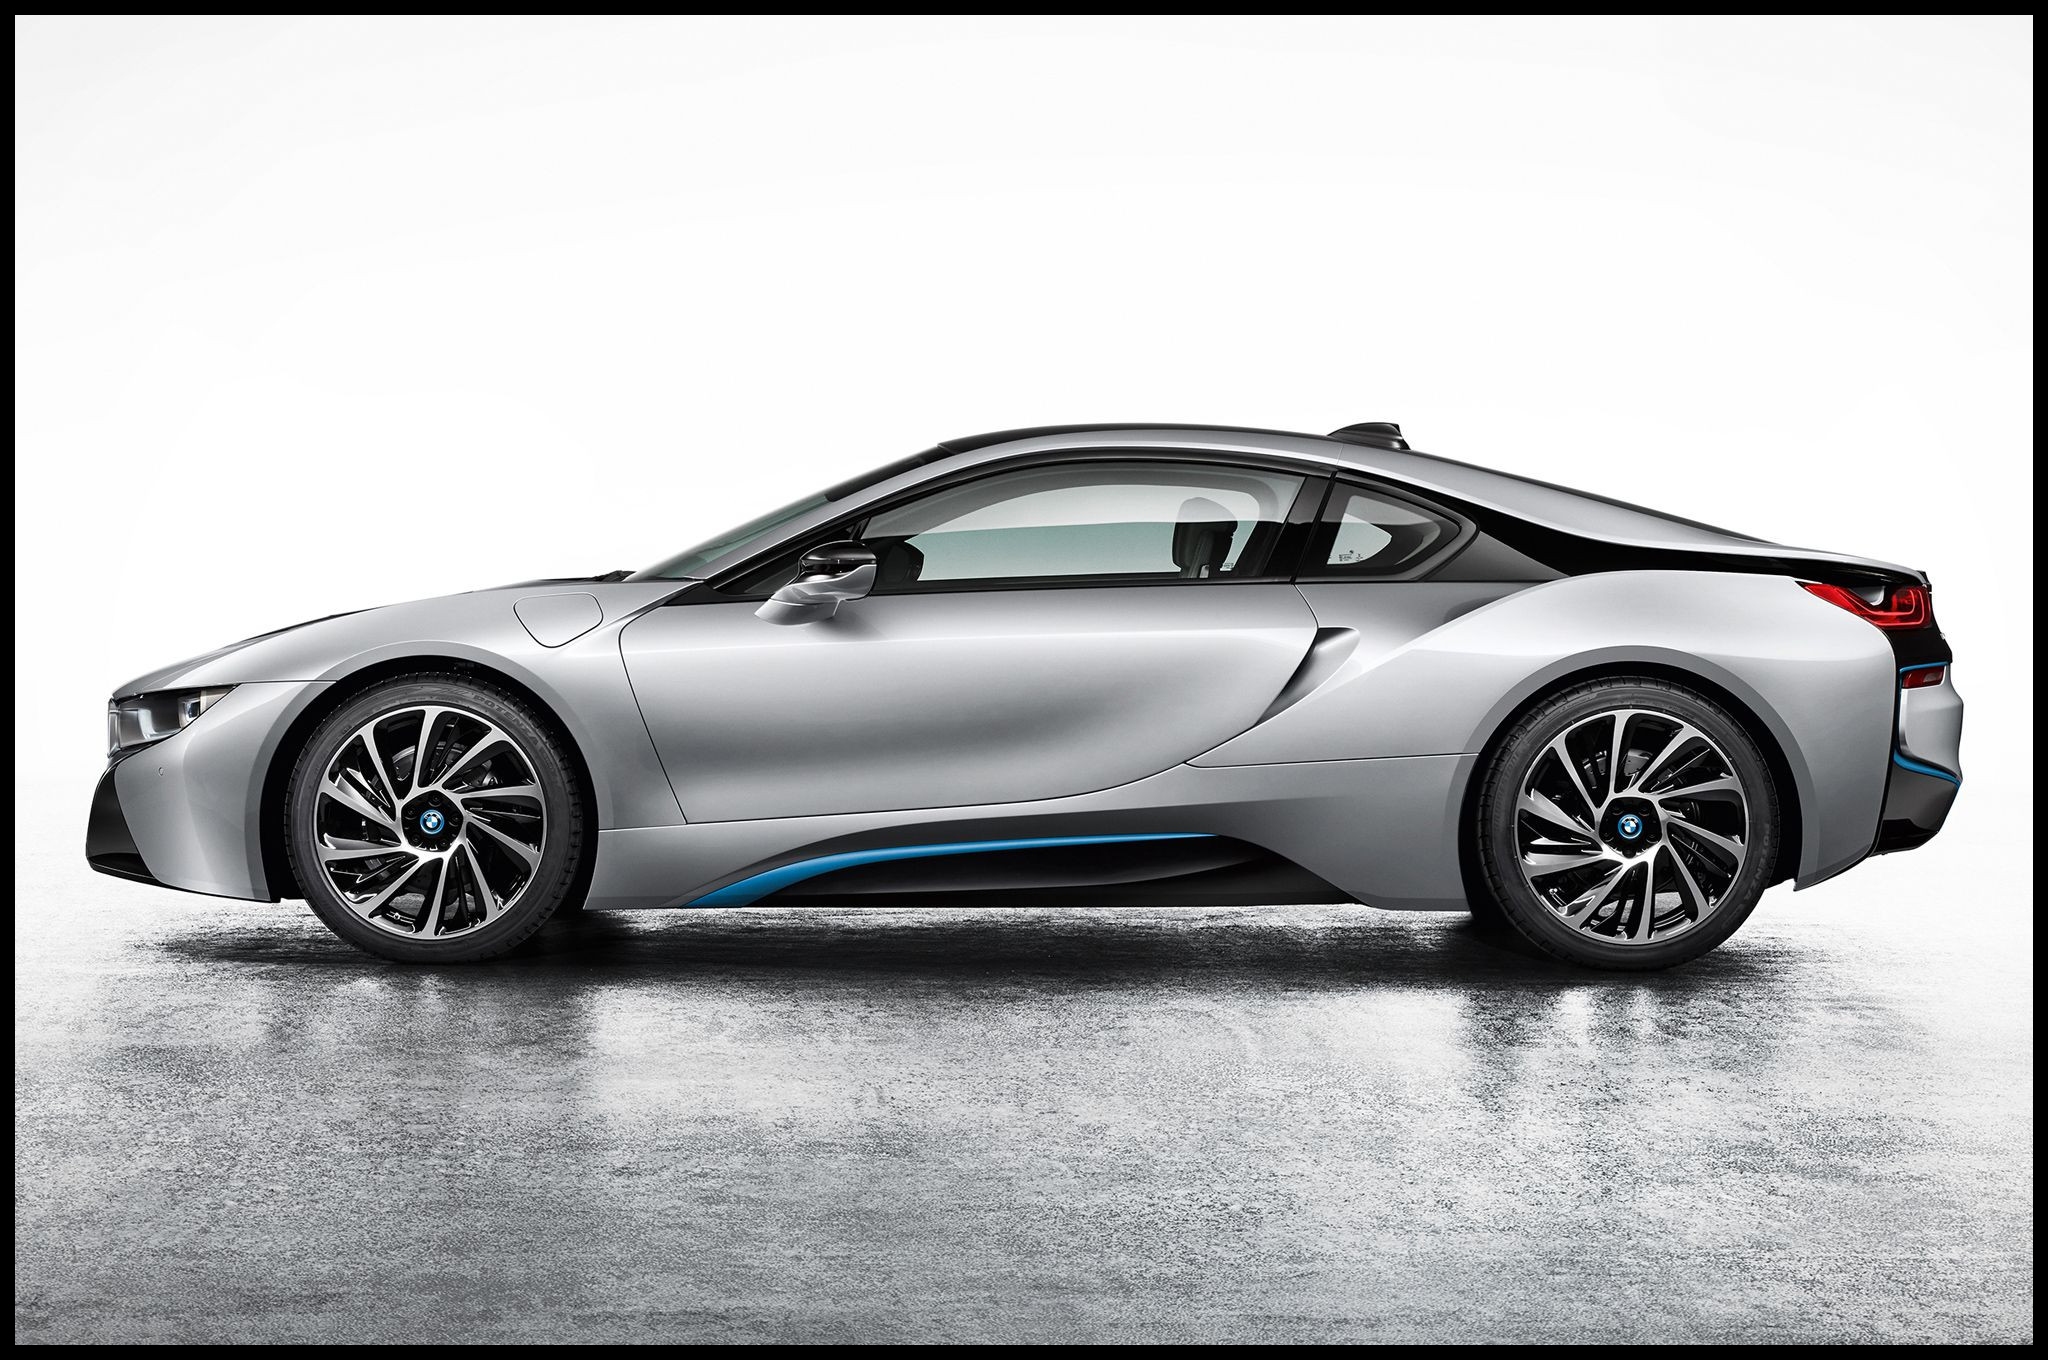 2014 Bmw I8 Hybrid Side View Wallpaper Bmw Wallpaper Awesome Supercars 2013 Wallpaper